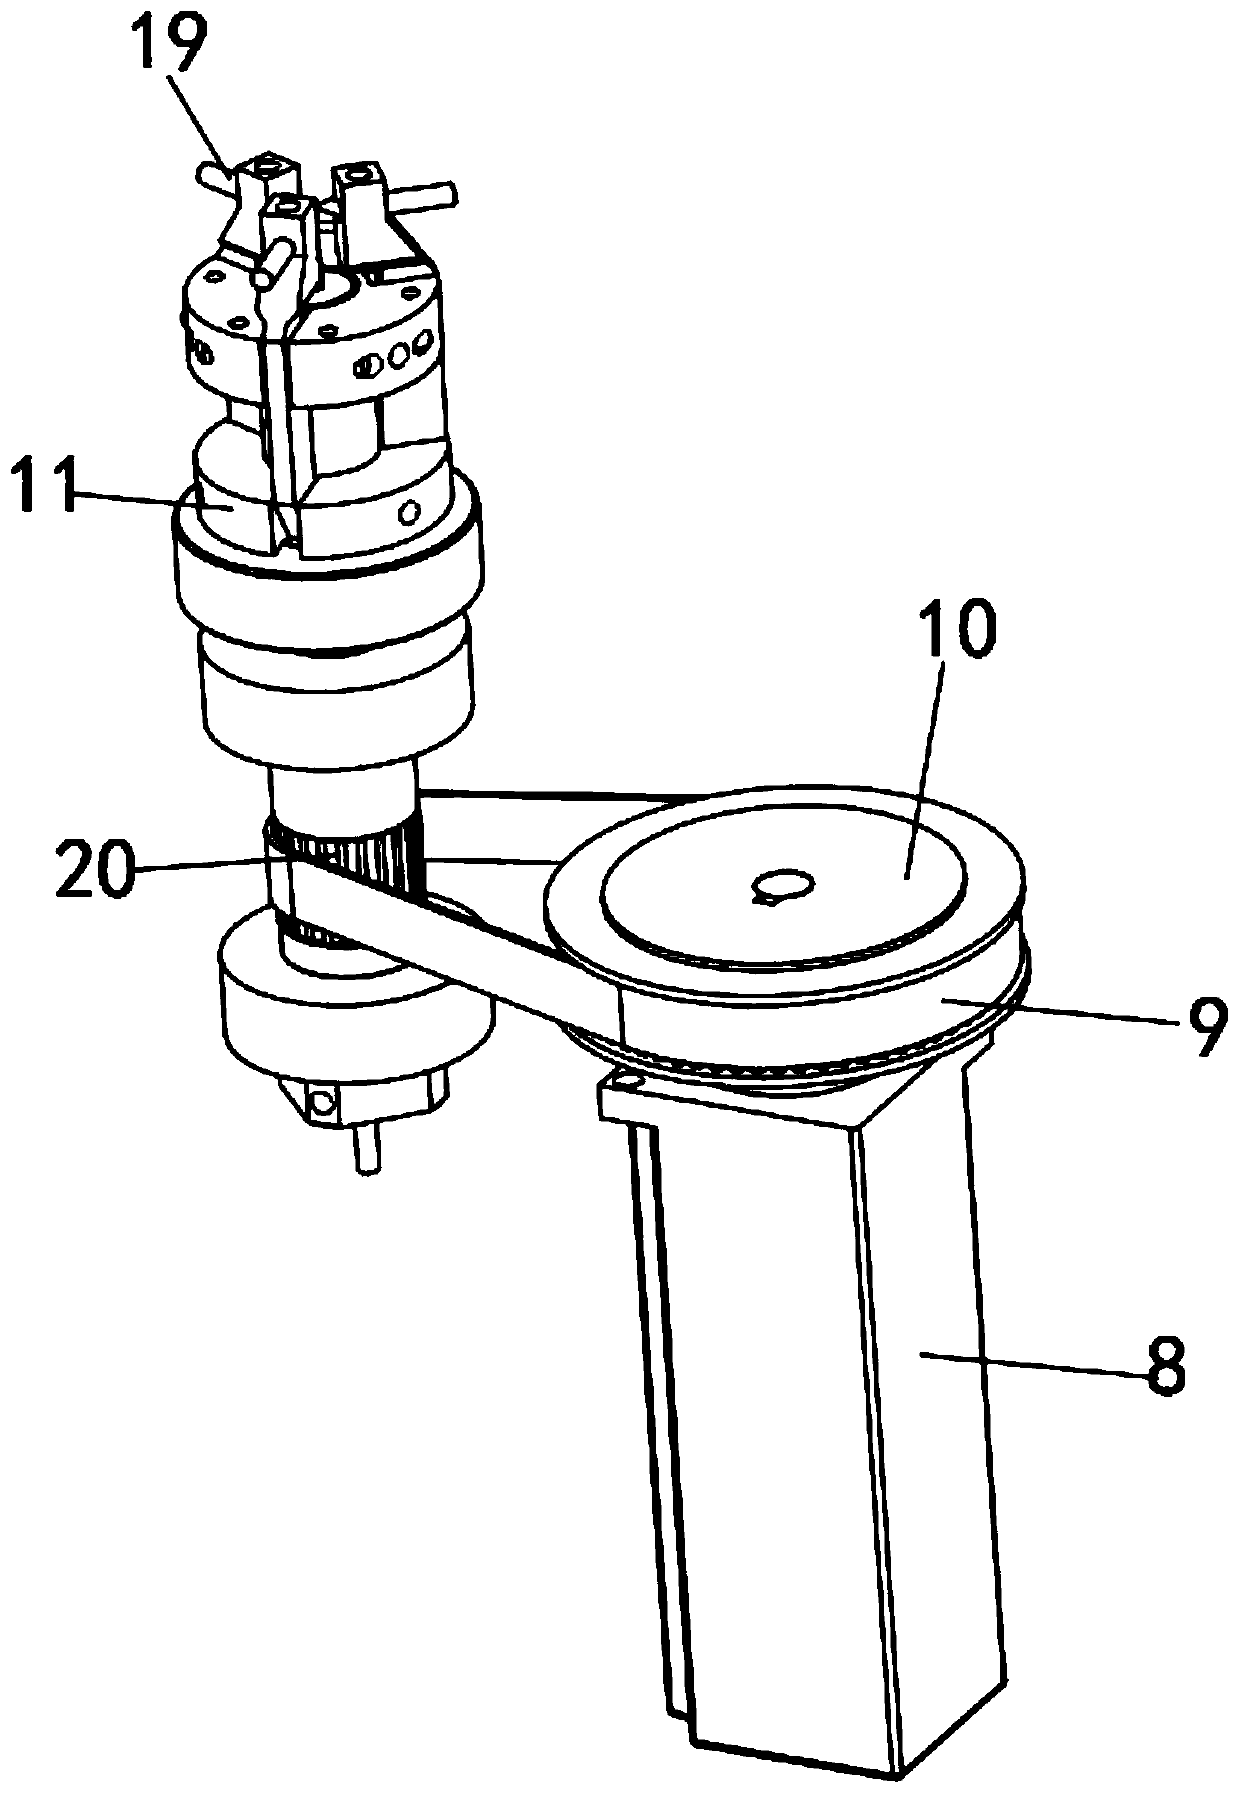 Take-up device with safety protection structure